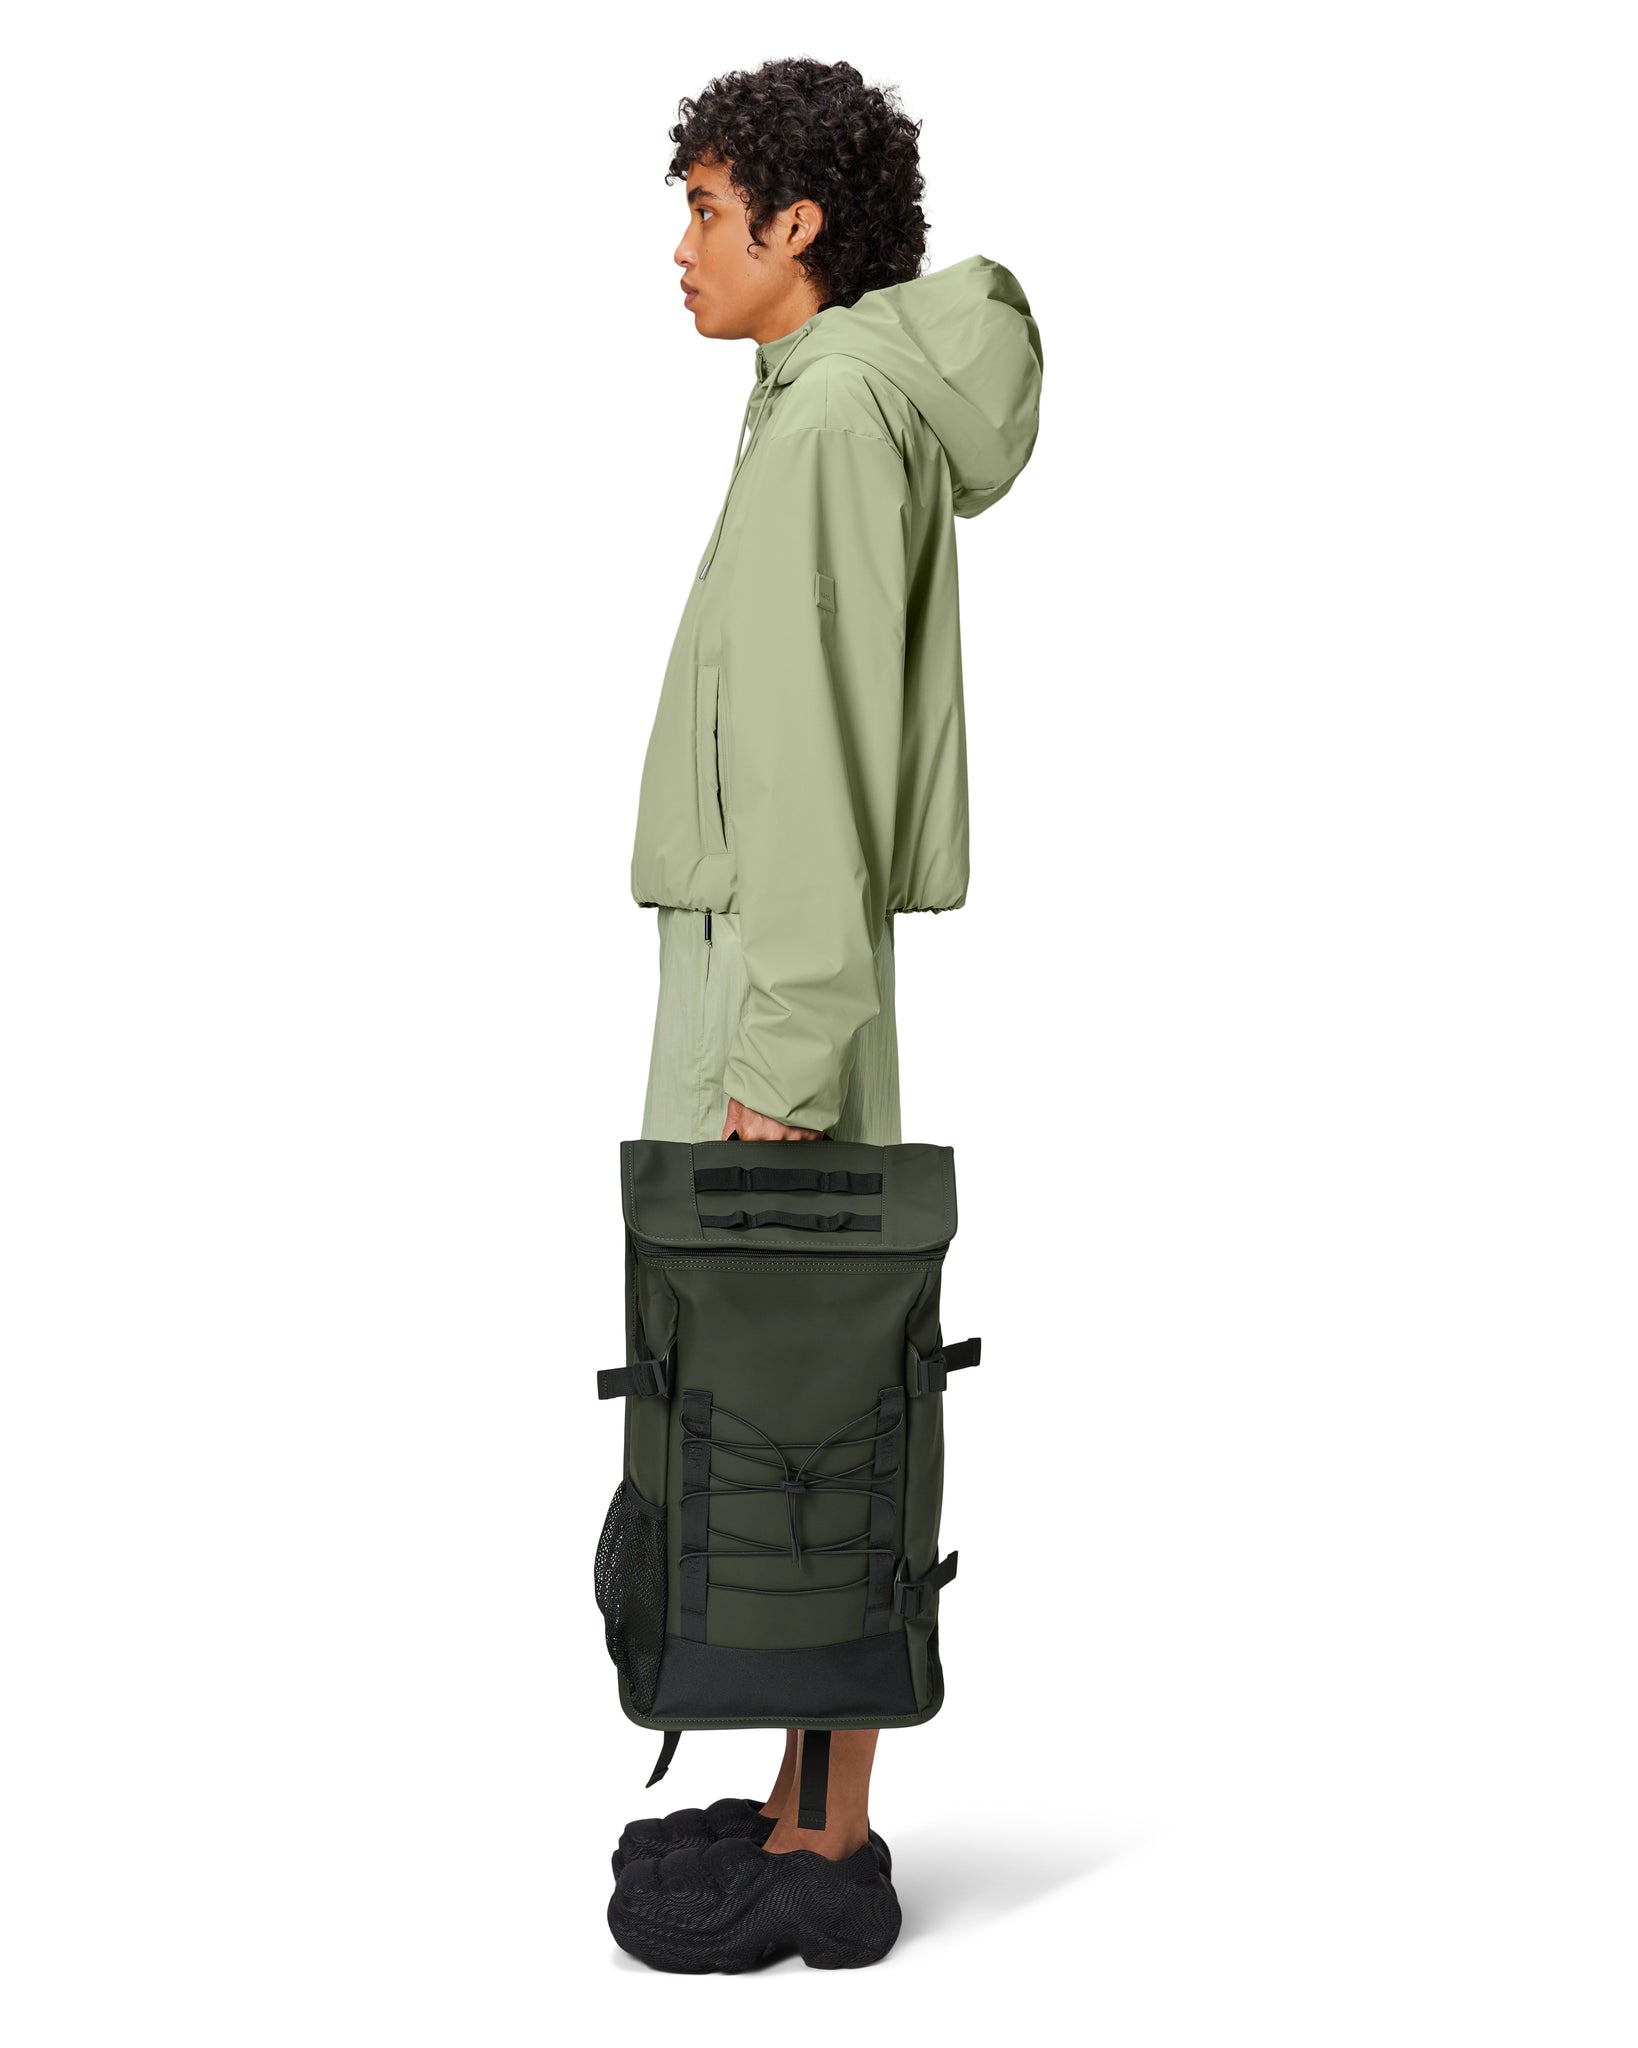 Trail Mountaineer Bag Backpack - Green